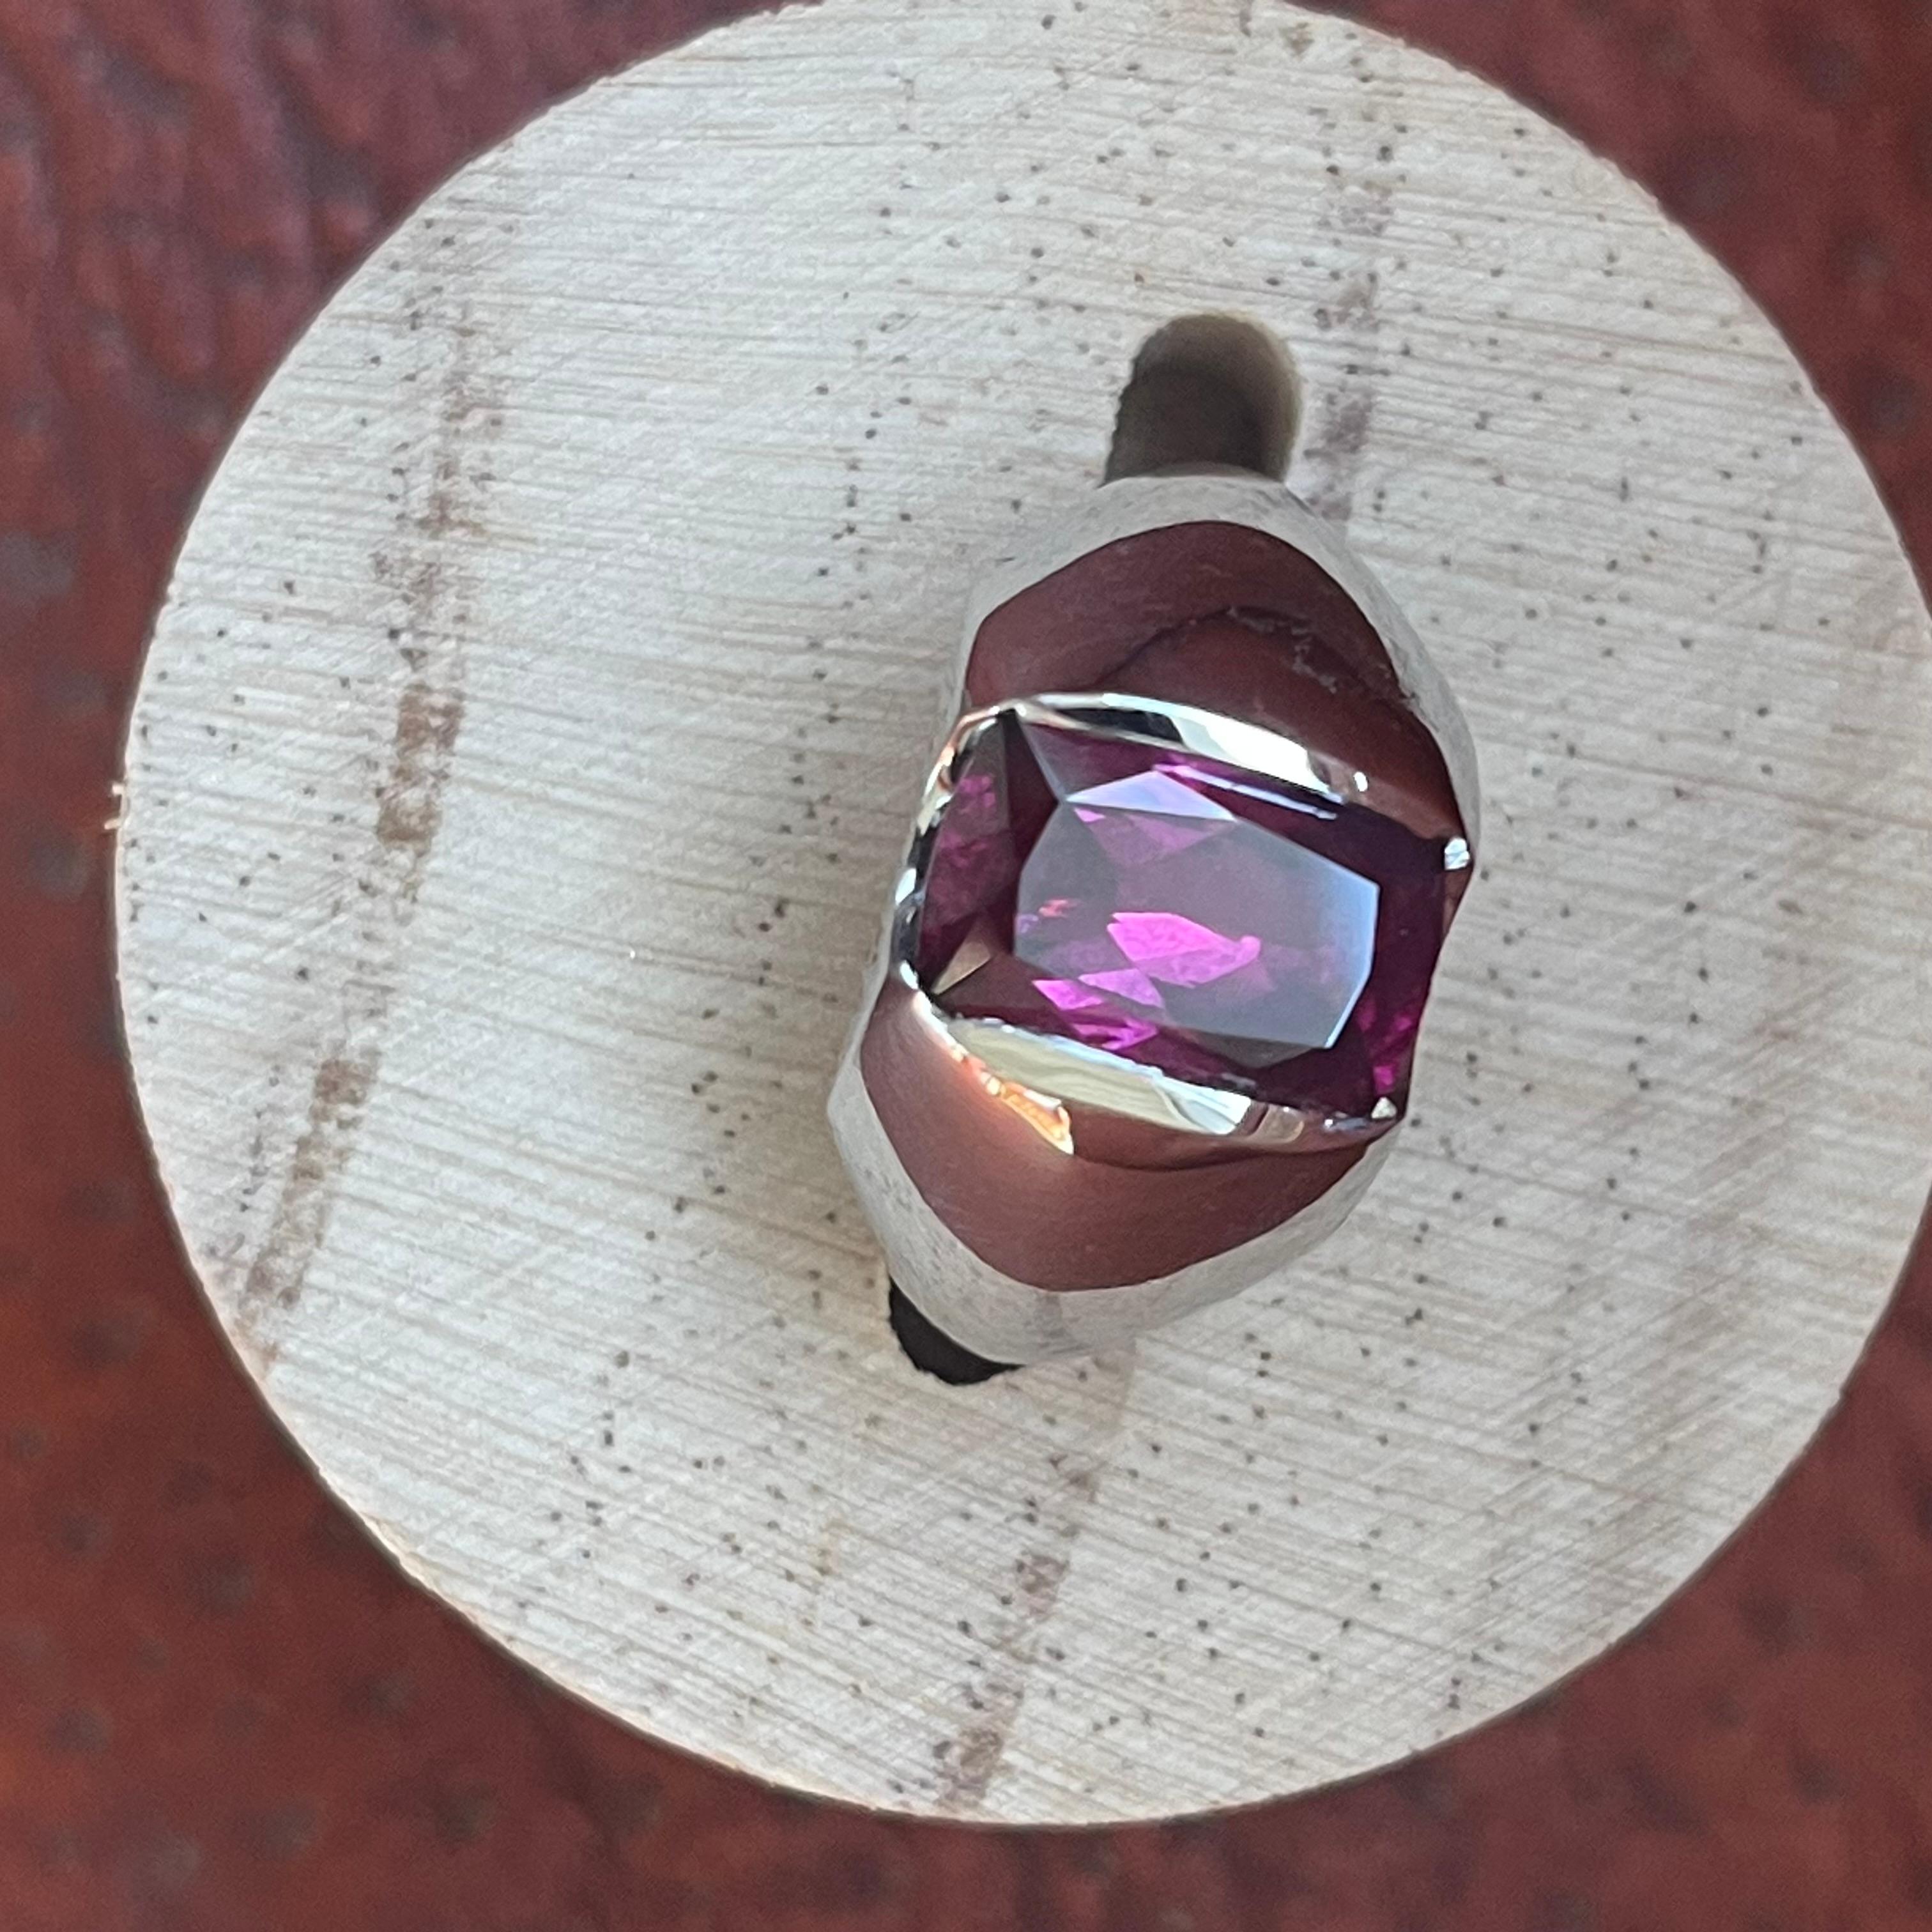 This Vance Gems design ring features a 4.03-carat, cushion-cut Rhodolite Garnet and is done in heavy 14-karat white gold. The half-bezel setting gives the stone enough light to make the purplish-red garnet sparkle. The euro shank stabilizes the ring